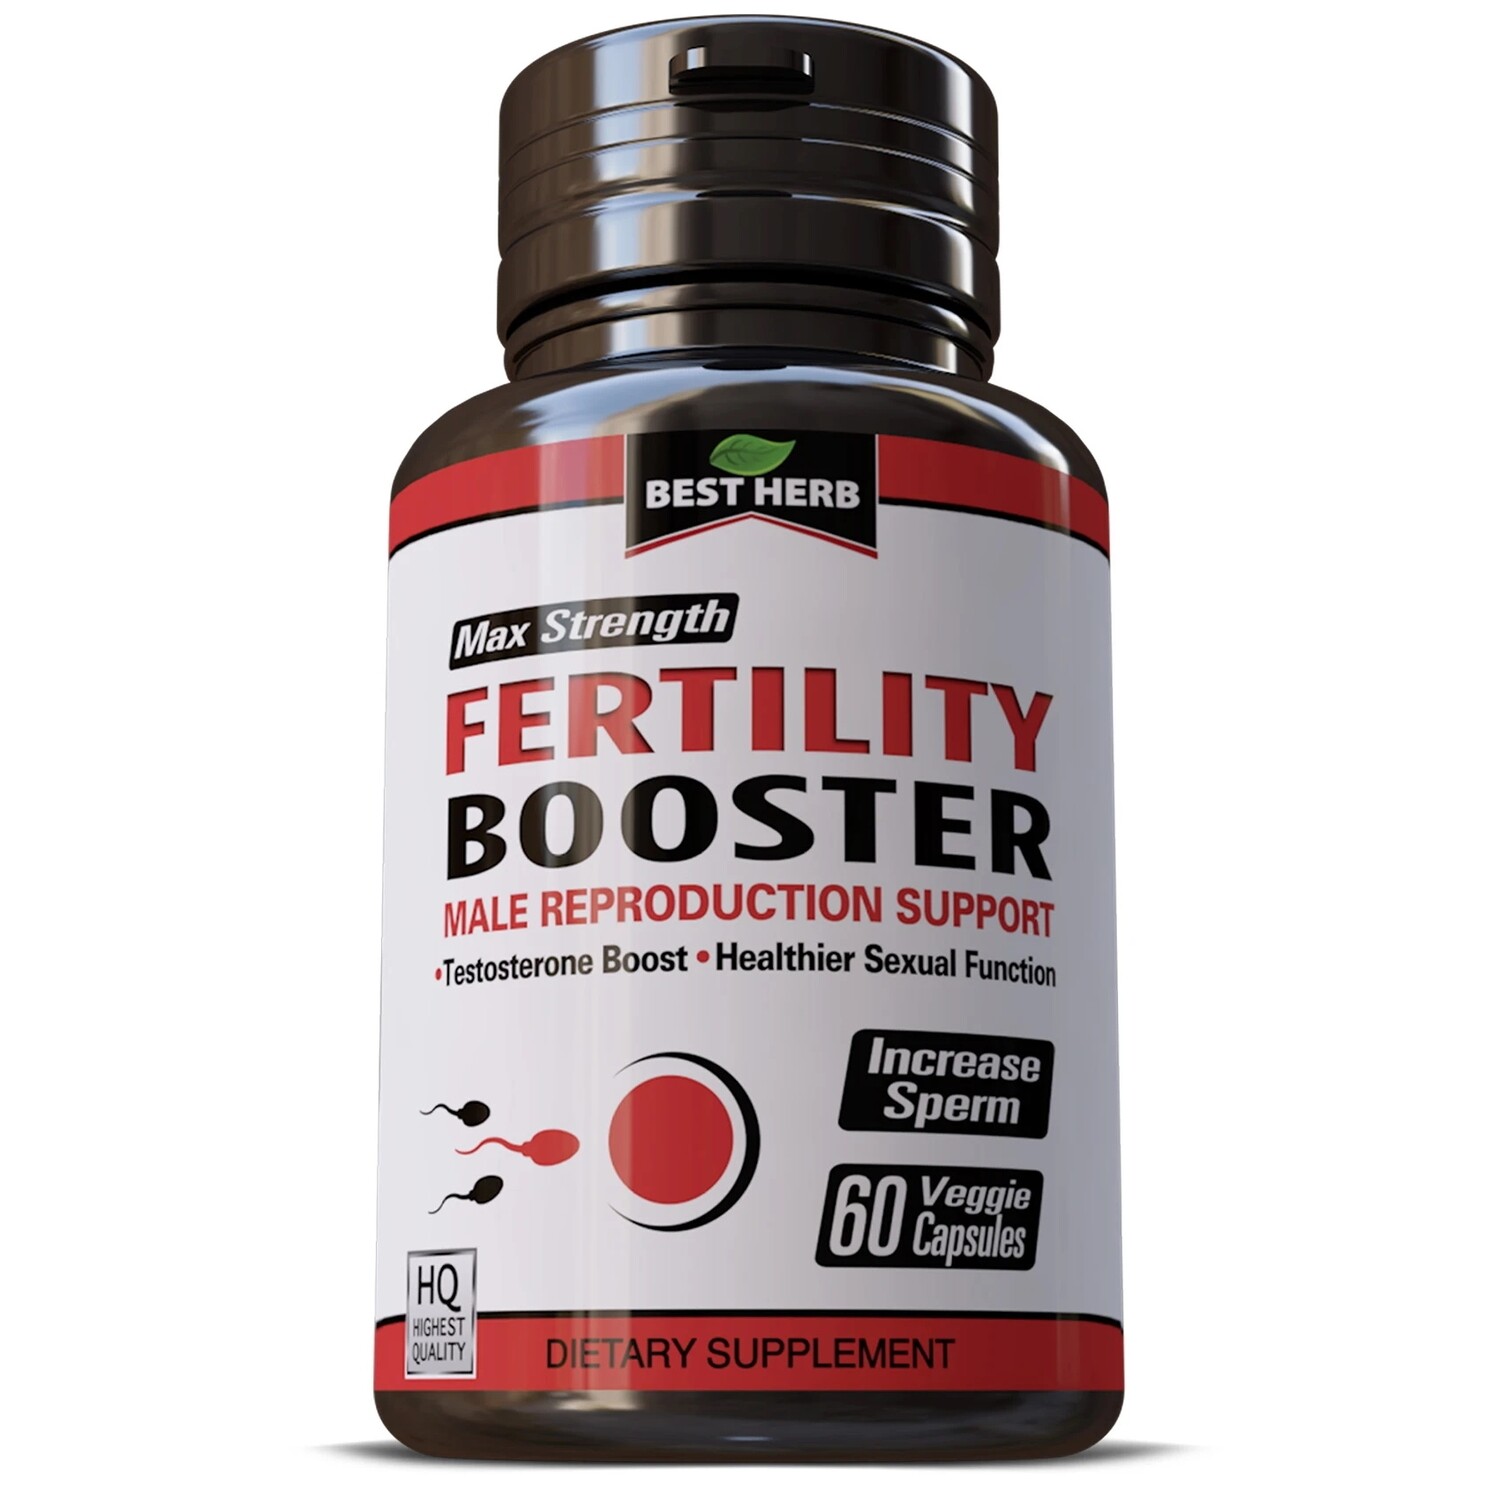 Natural Male Fertility Booster Aid Conception Support Increase Sperm Motility Volume 60 x Capsules